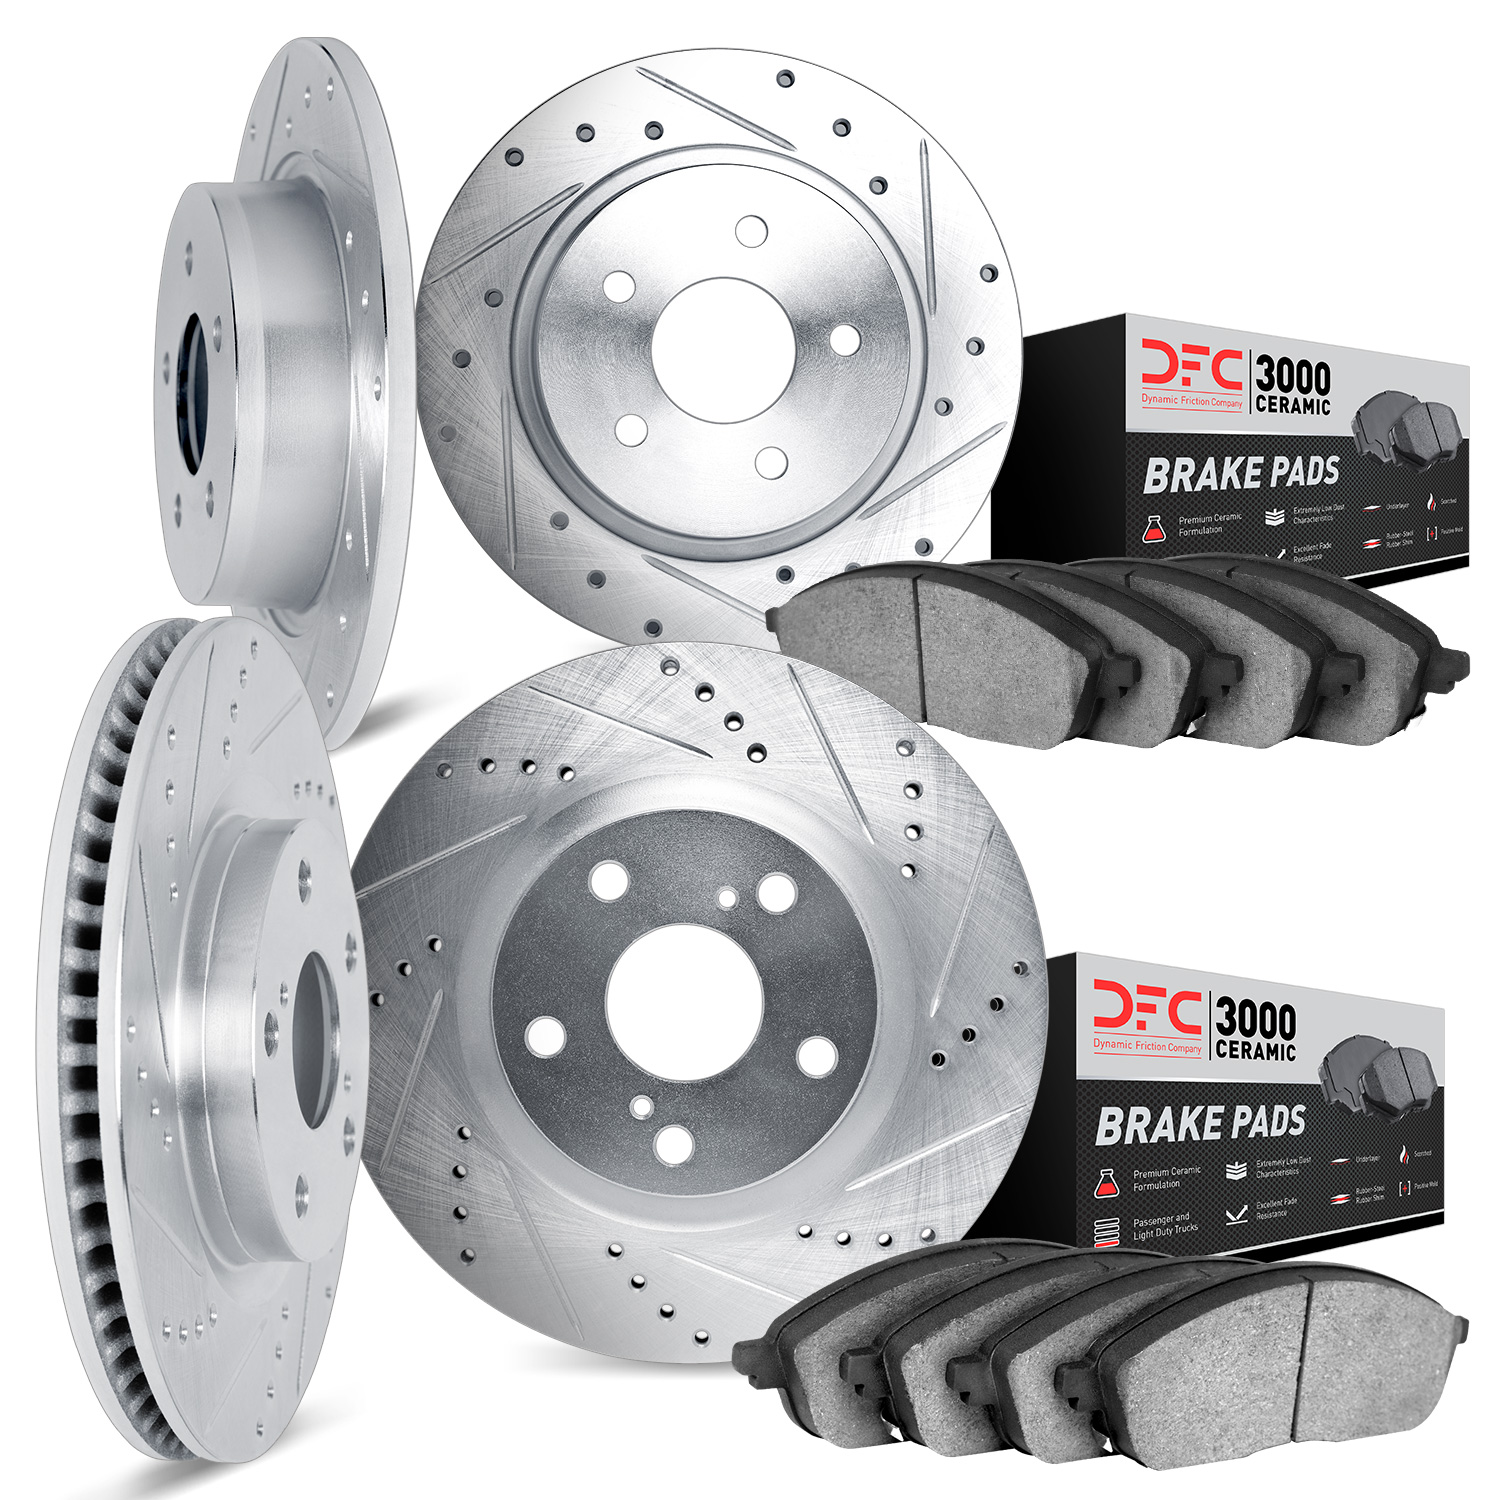 7304-73054 Drilled/Slotted Brake Rotor with 3000-Series Ceramic Brake Pads Kit [Silver], 2001-2005 Audi/Volkswagen, Position: Fr